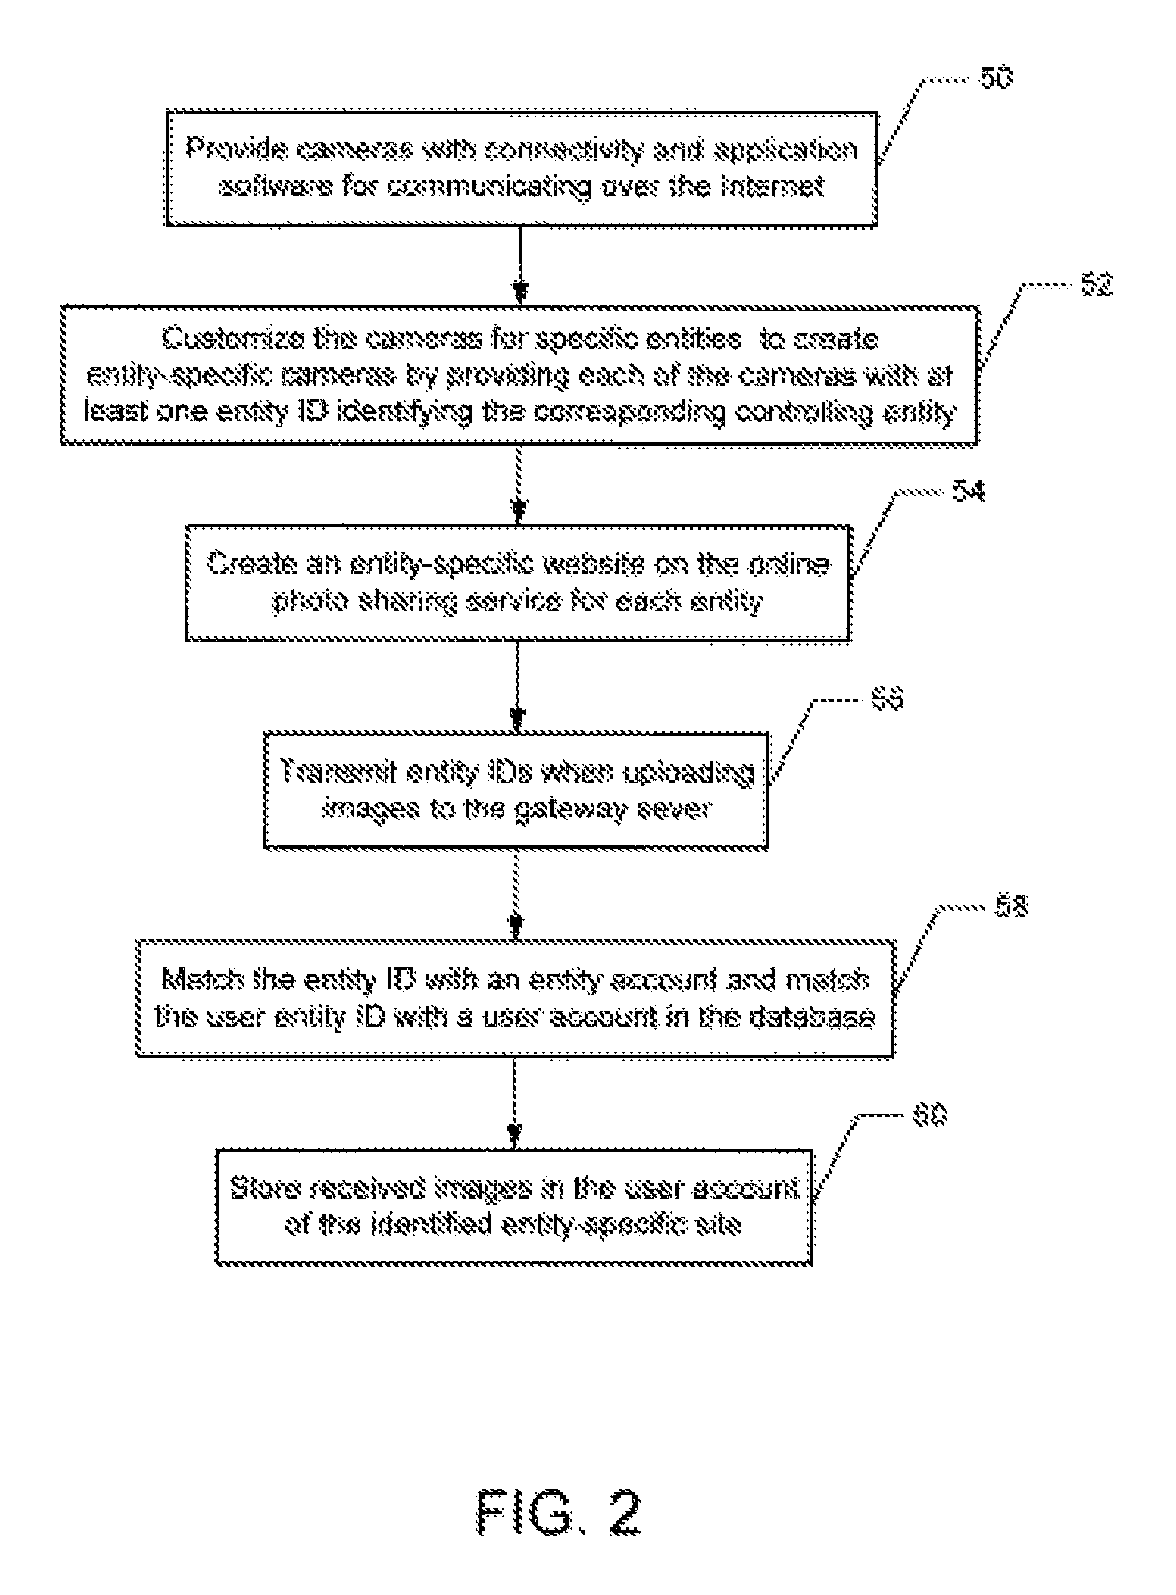 Method and system for hosting entity-specific photo-sharing websites for entity-specific digital cameras